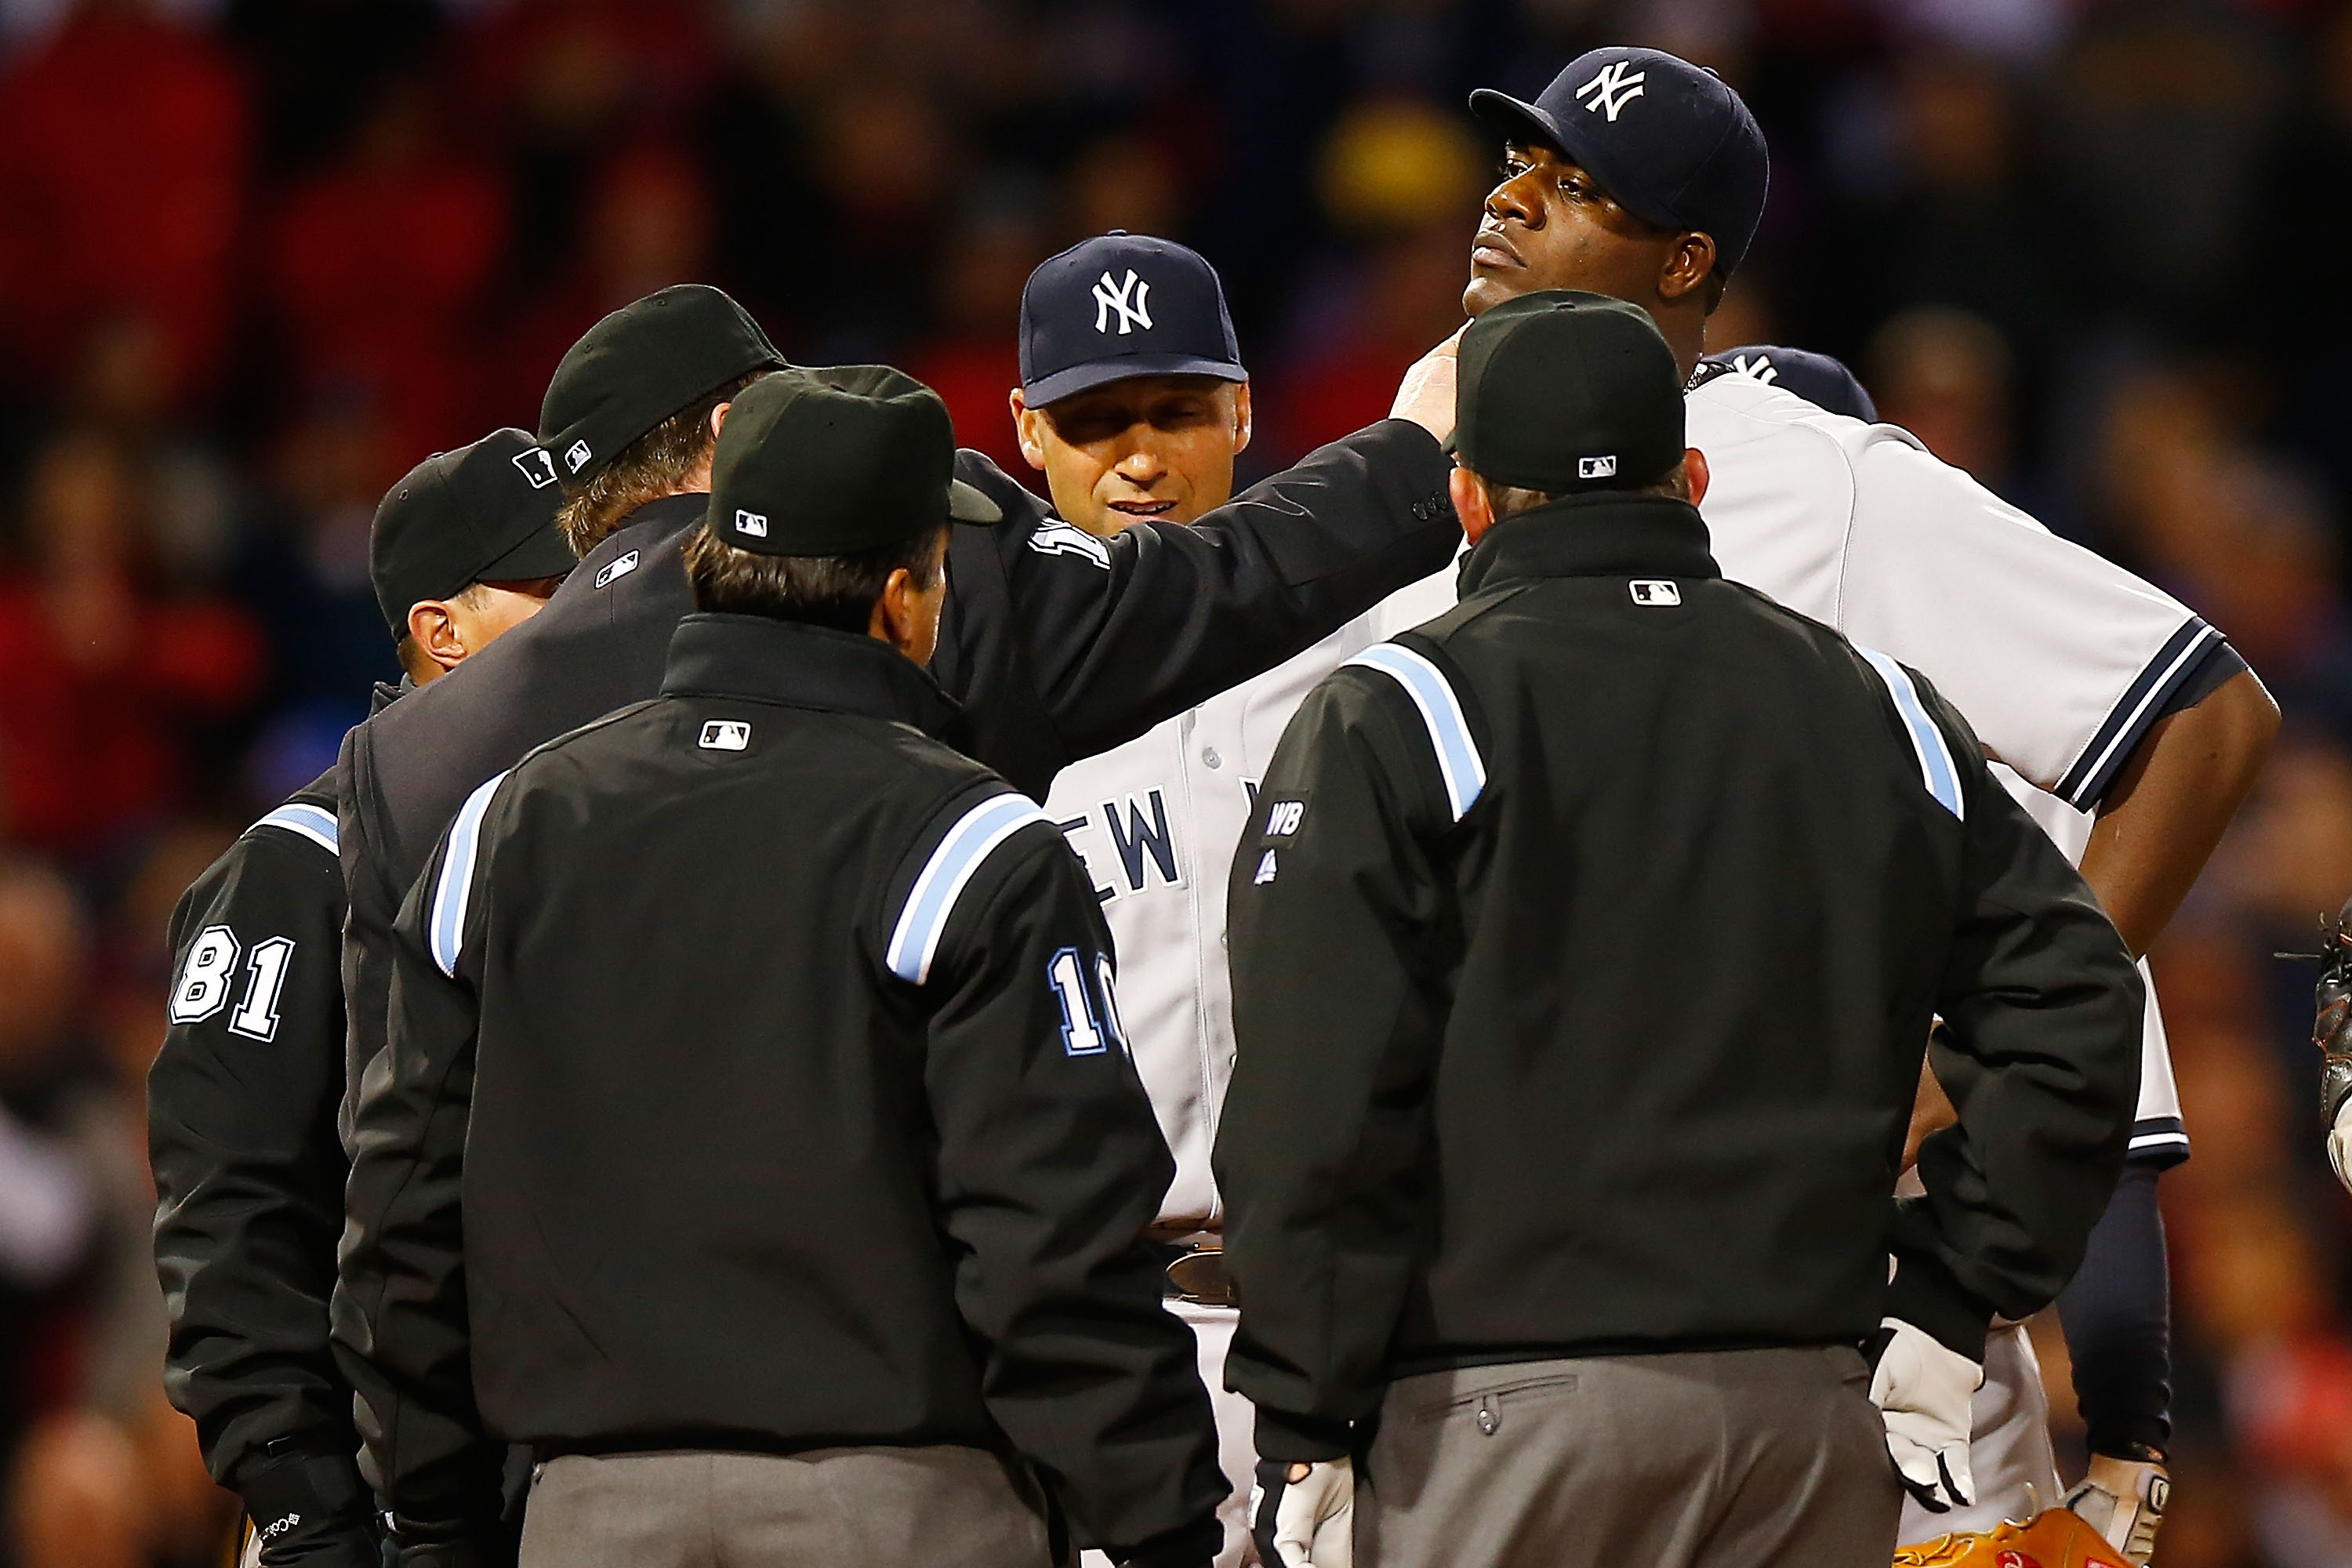 Home plate umpire Gerry Davis checks out a substance on the neck of Michael Pineda as New York Yankees shortstop Derek Jeter looks on. (Jared Wickerham&mdash;Getty Images)